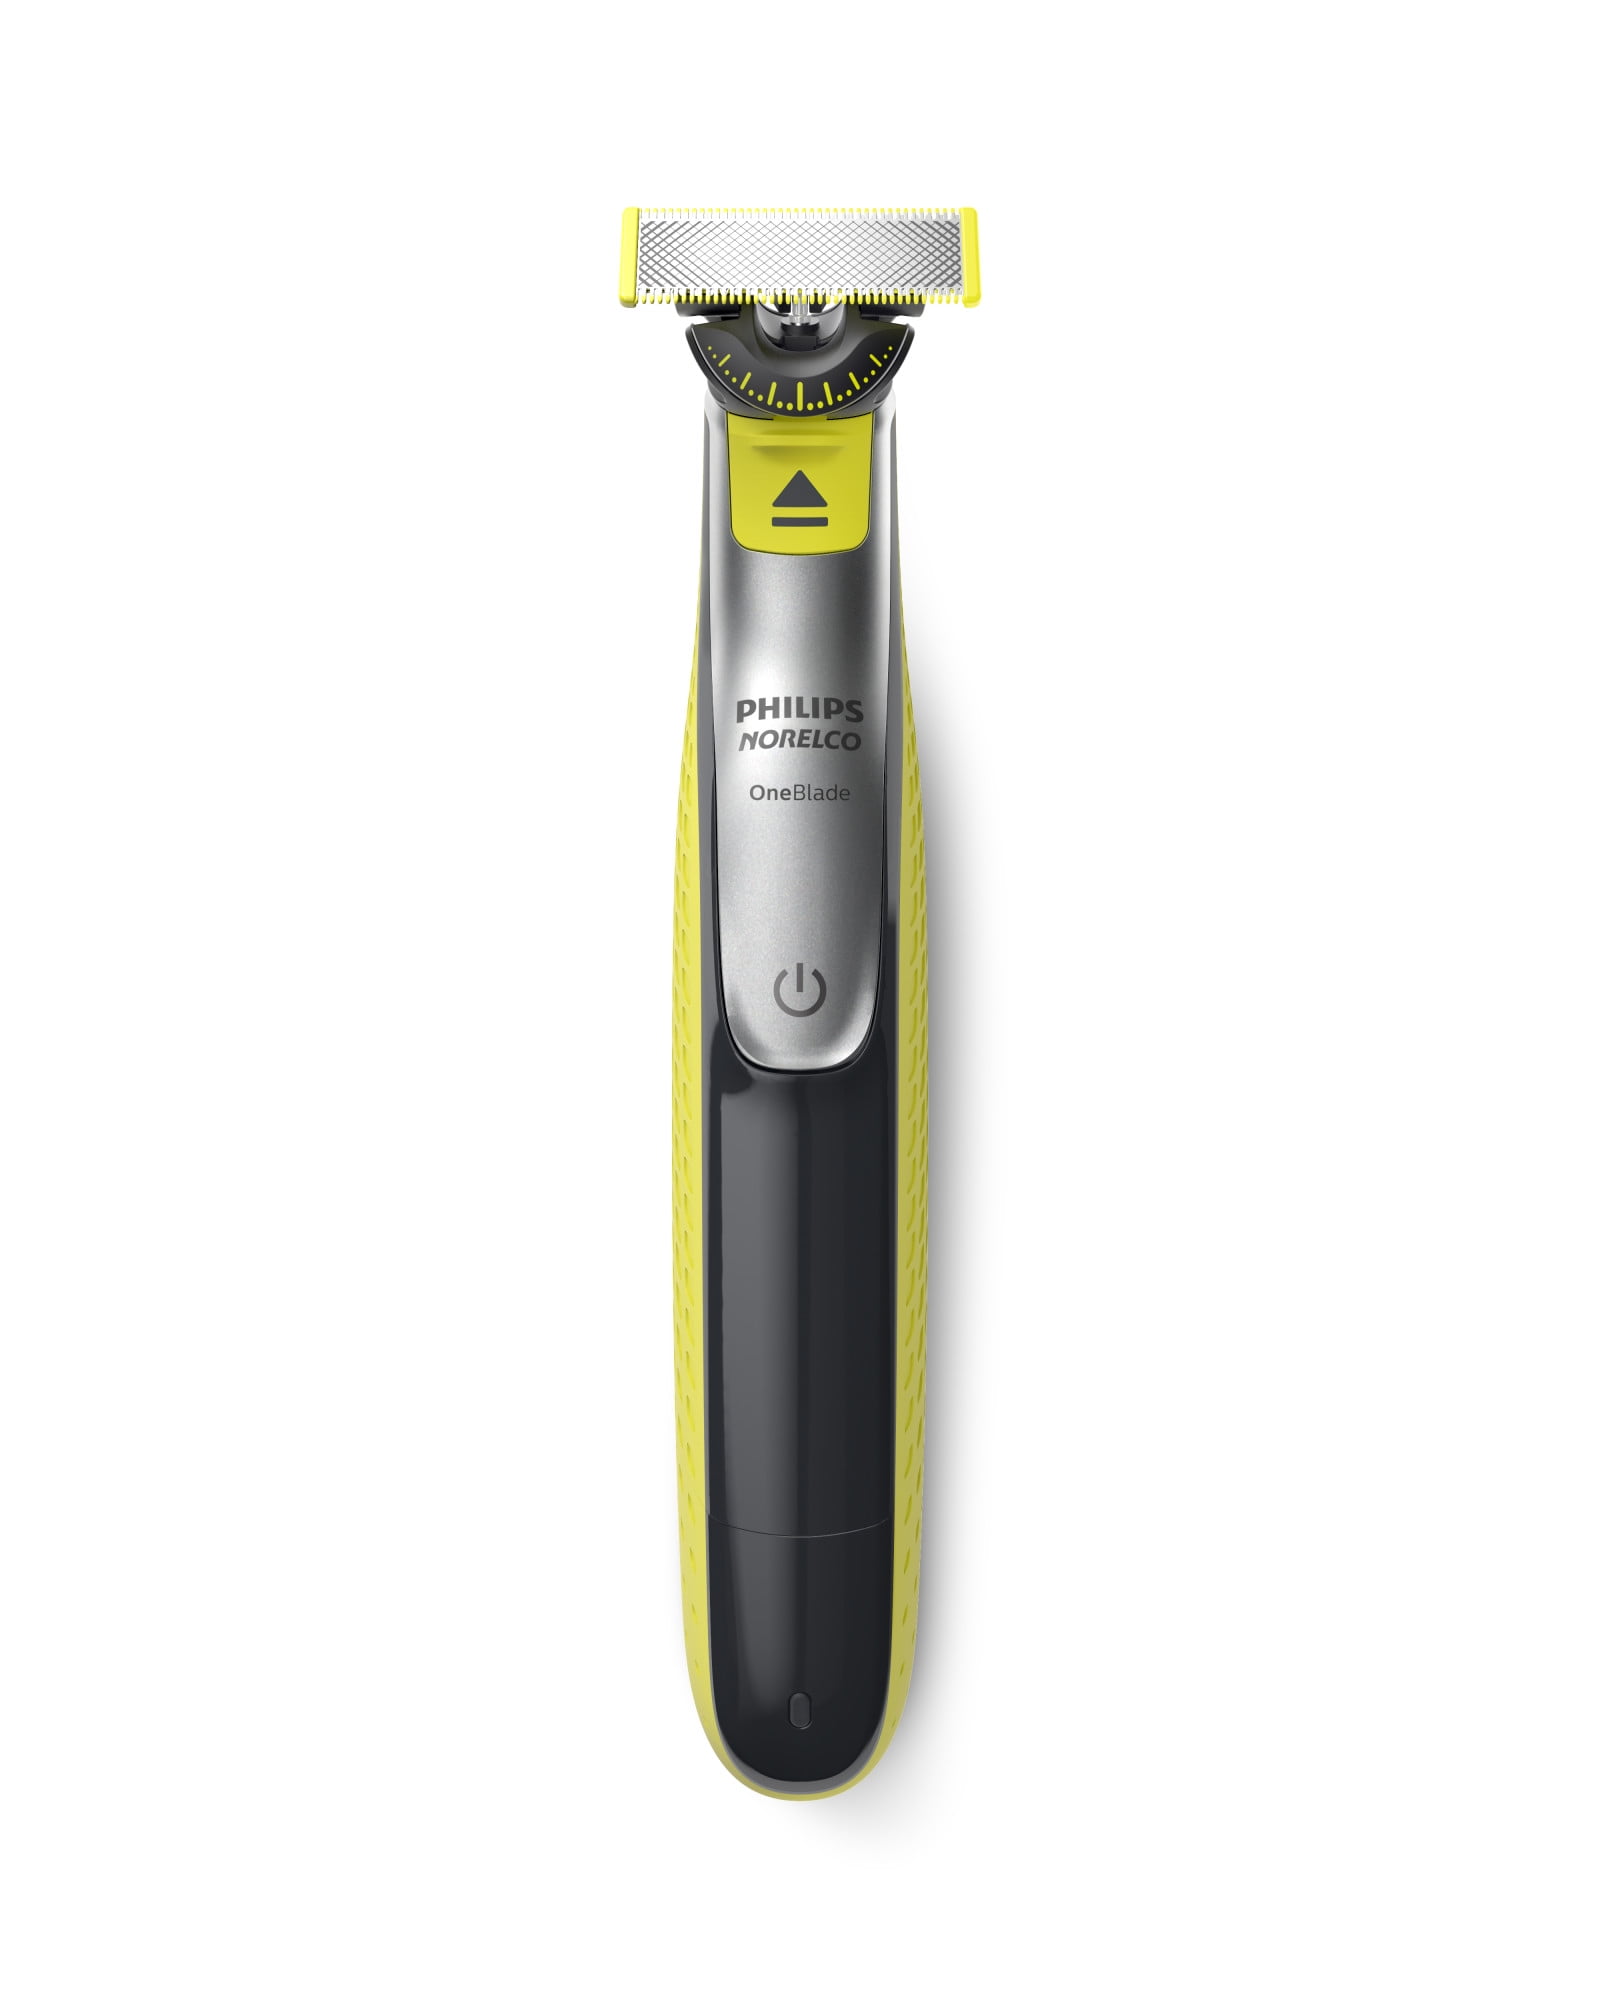 Philips Oneblade 360 Face + Body Electric and Shaver, QP2834/70 Walmart.com